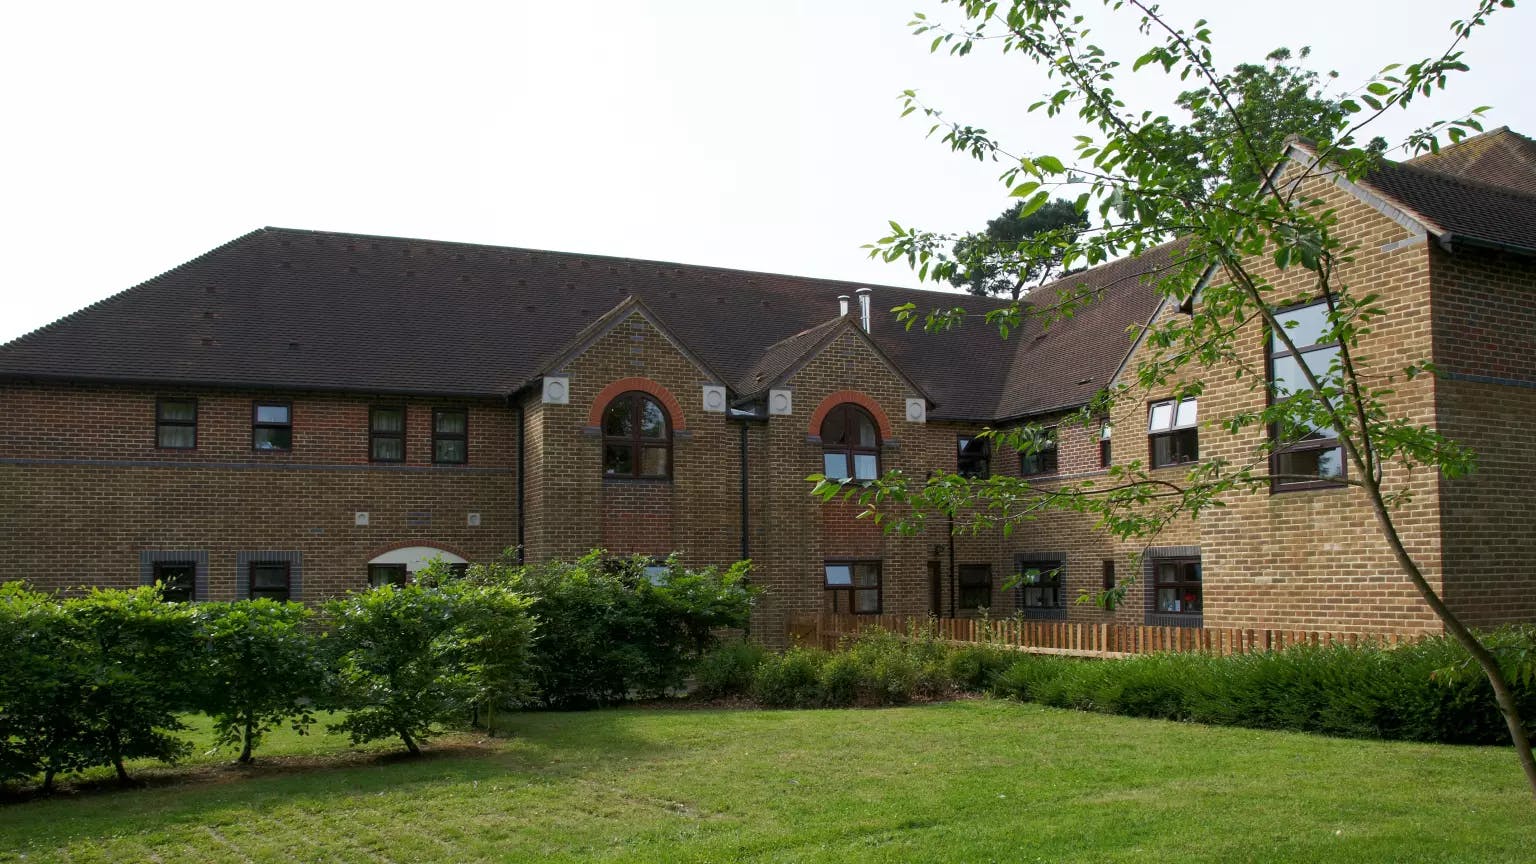 Exterior of Beane River View care home in Hertford, Hertfordshire